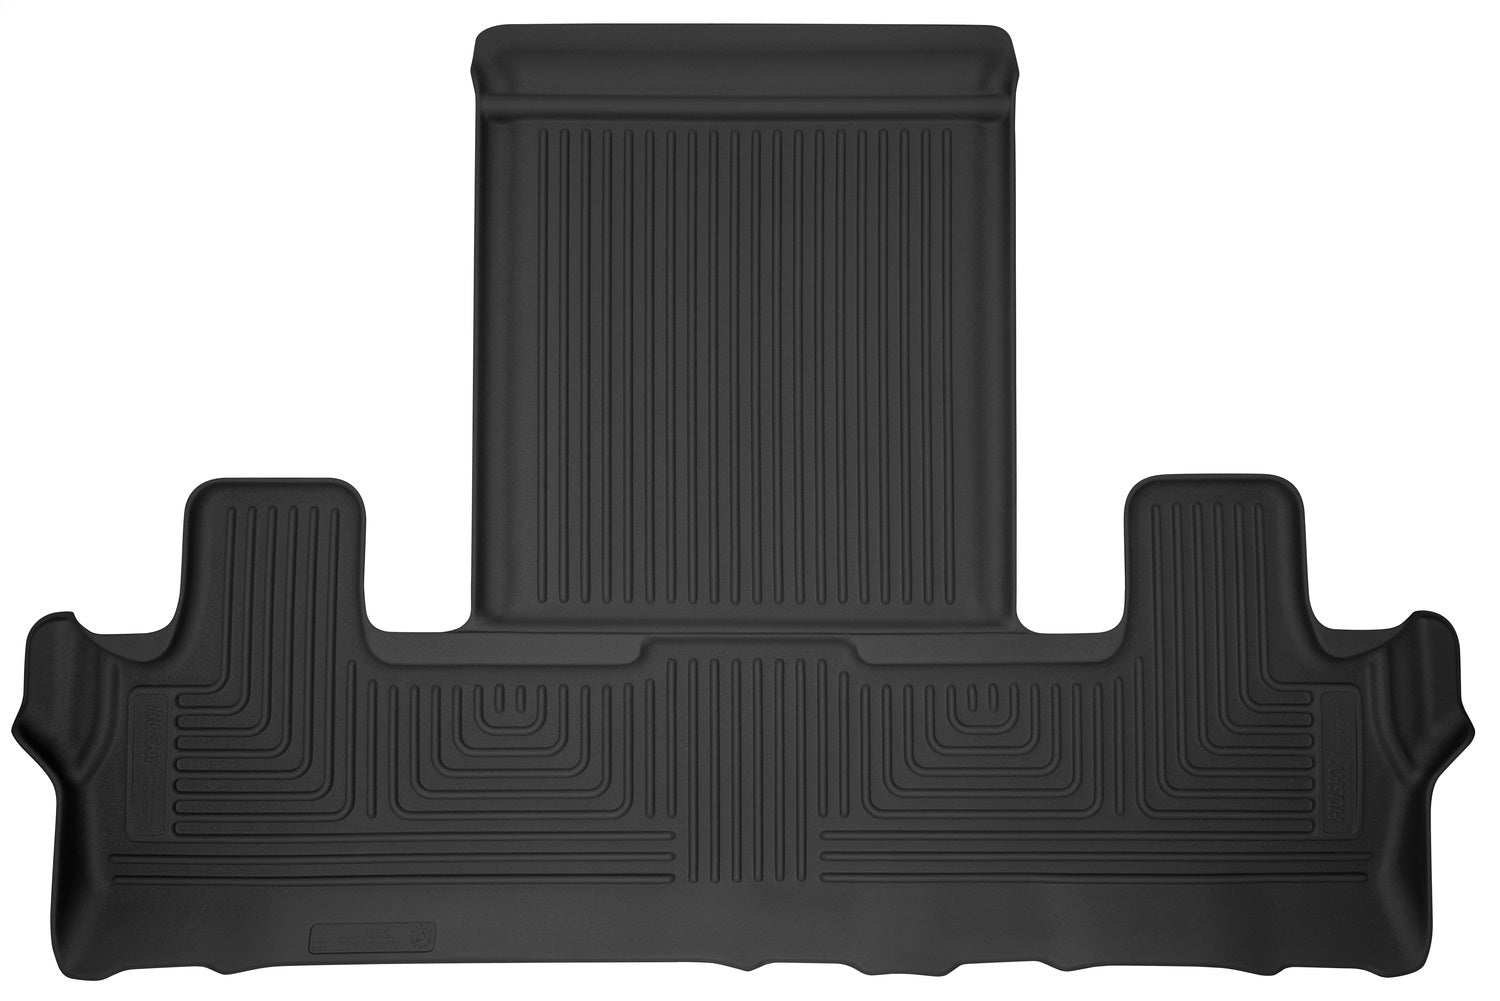 Husky Liners 54671 X-act Contour Floor Liner Fits 18-21 Expedition Navigator